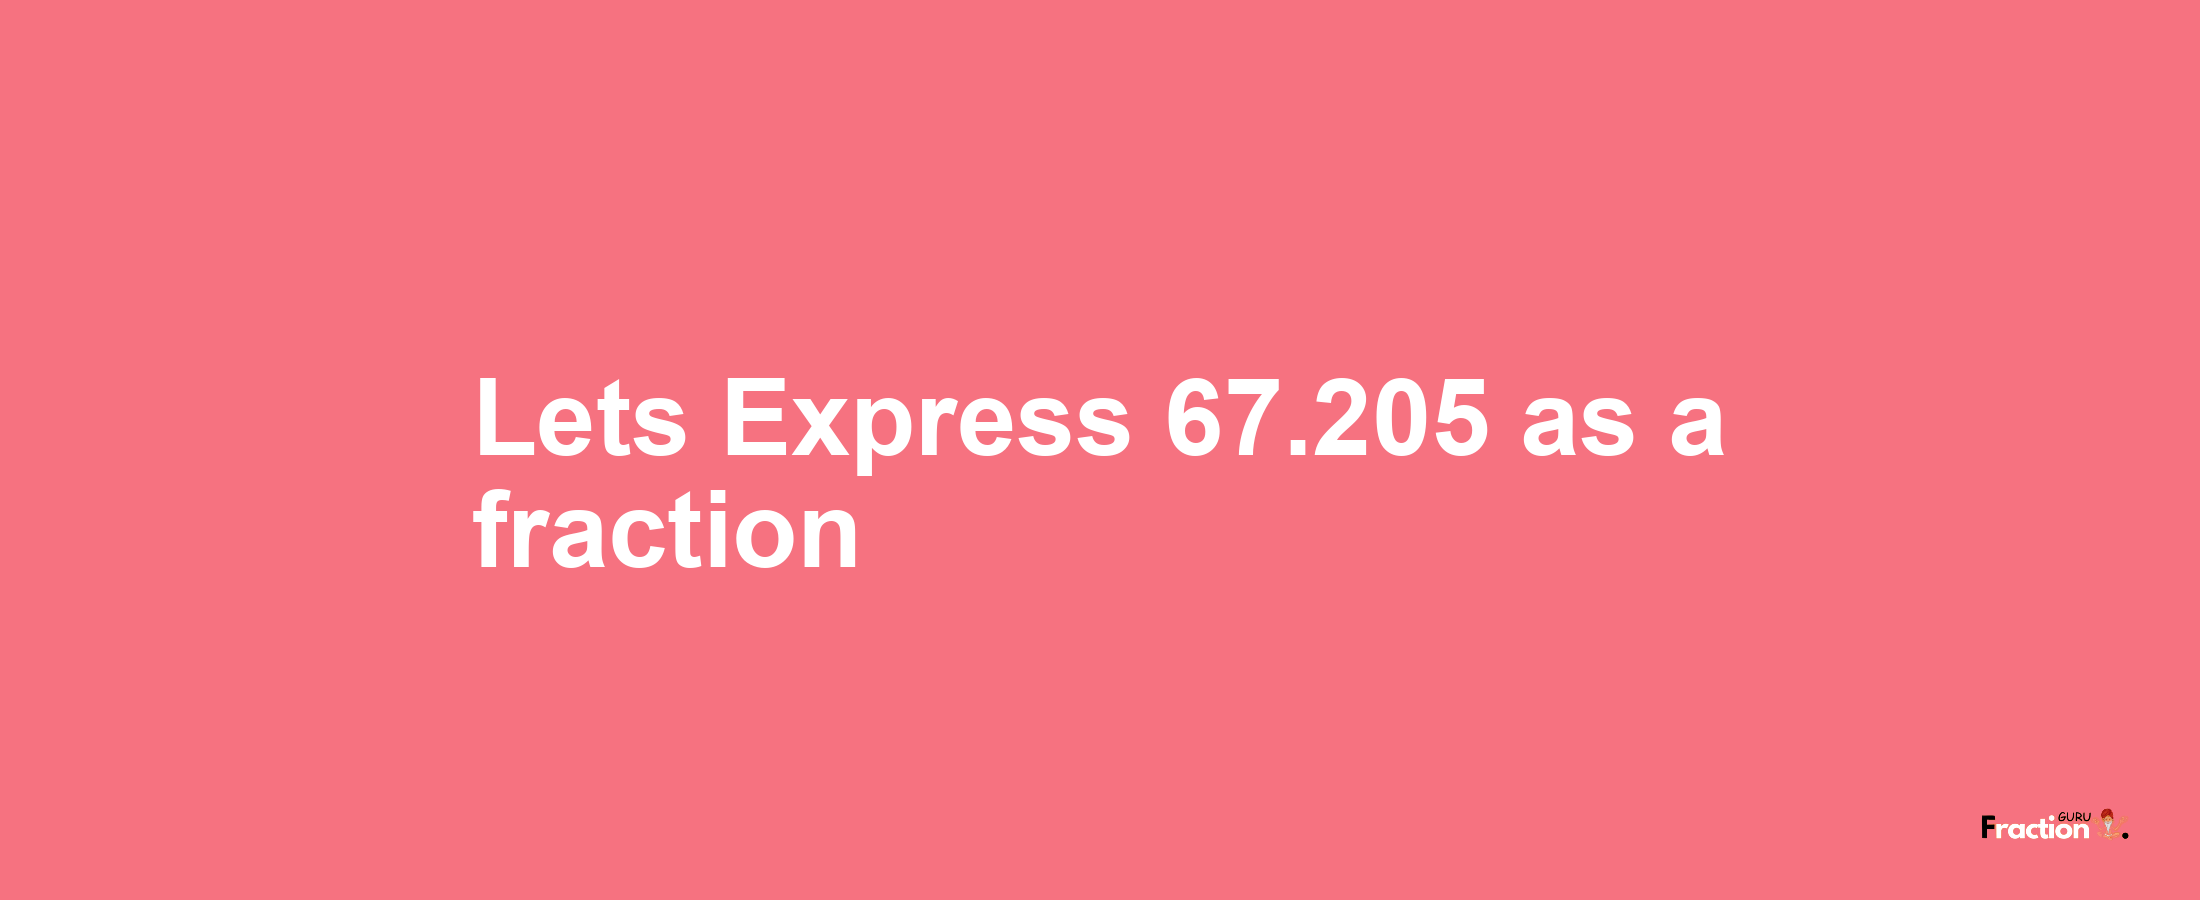 Lets Express 67.205 as afraction